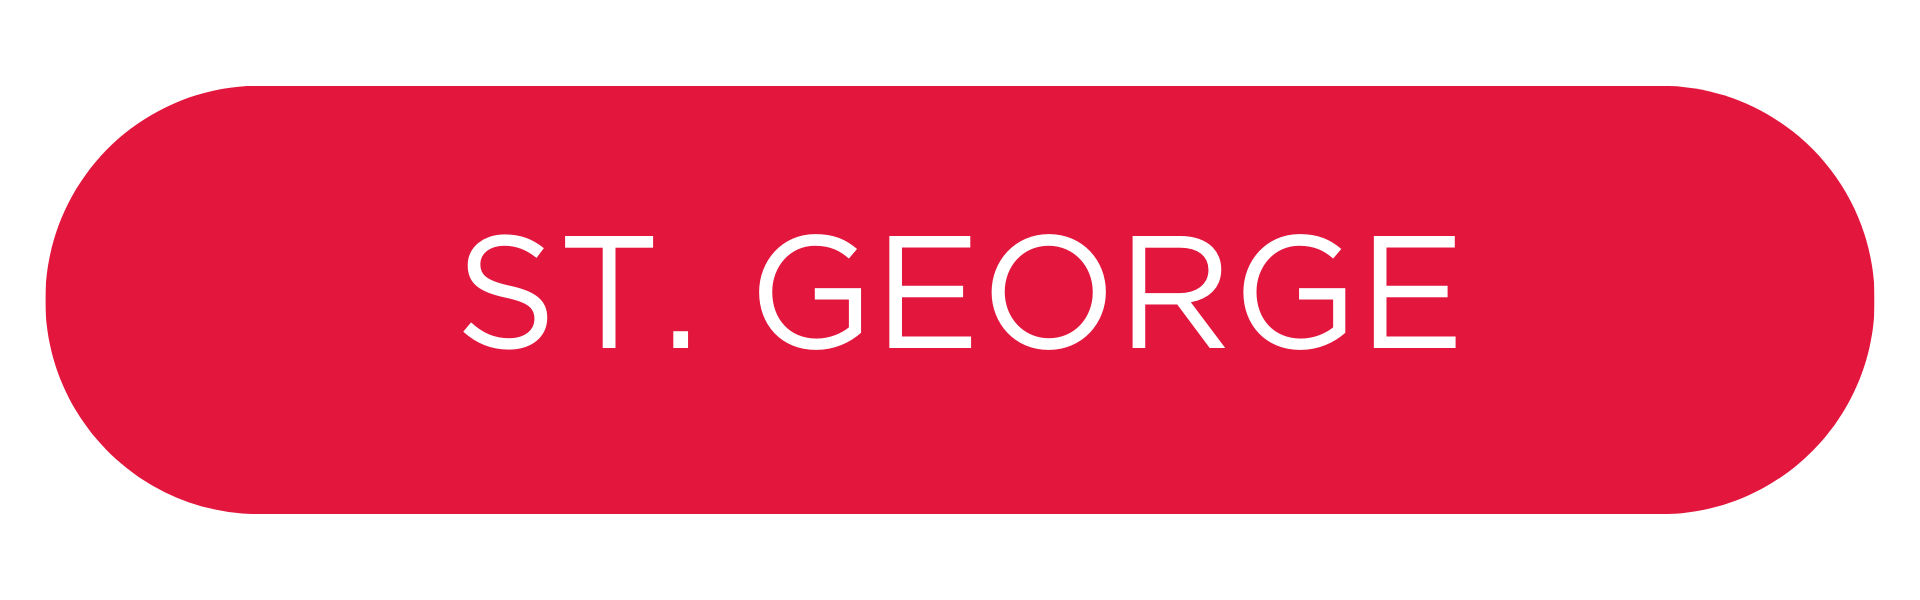 St. George office icon